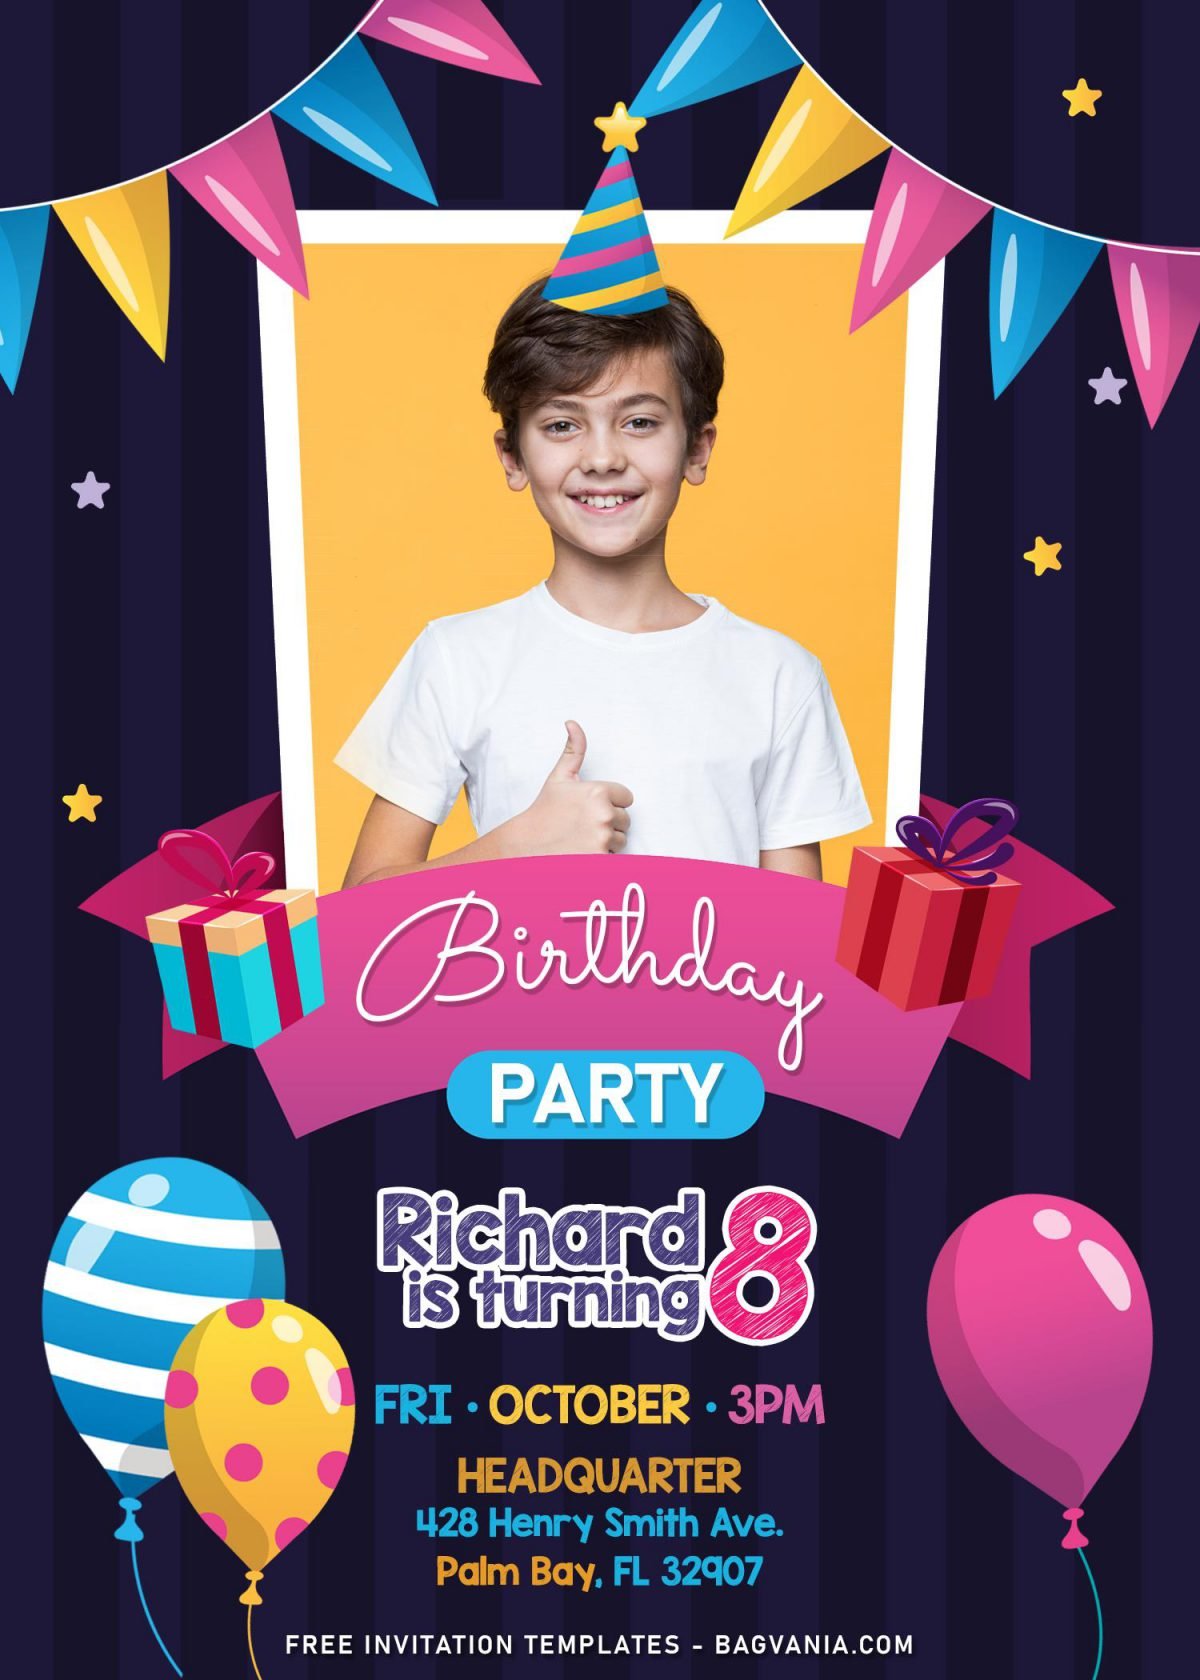 11+ Fun Birthday Invitation Templates For Your Kid’s Upcoming Birthday Party